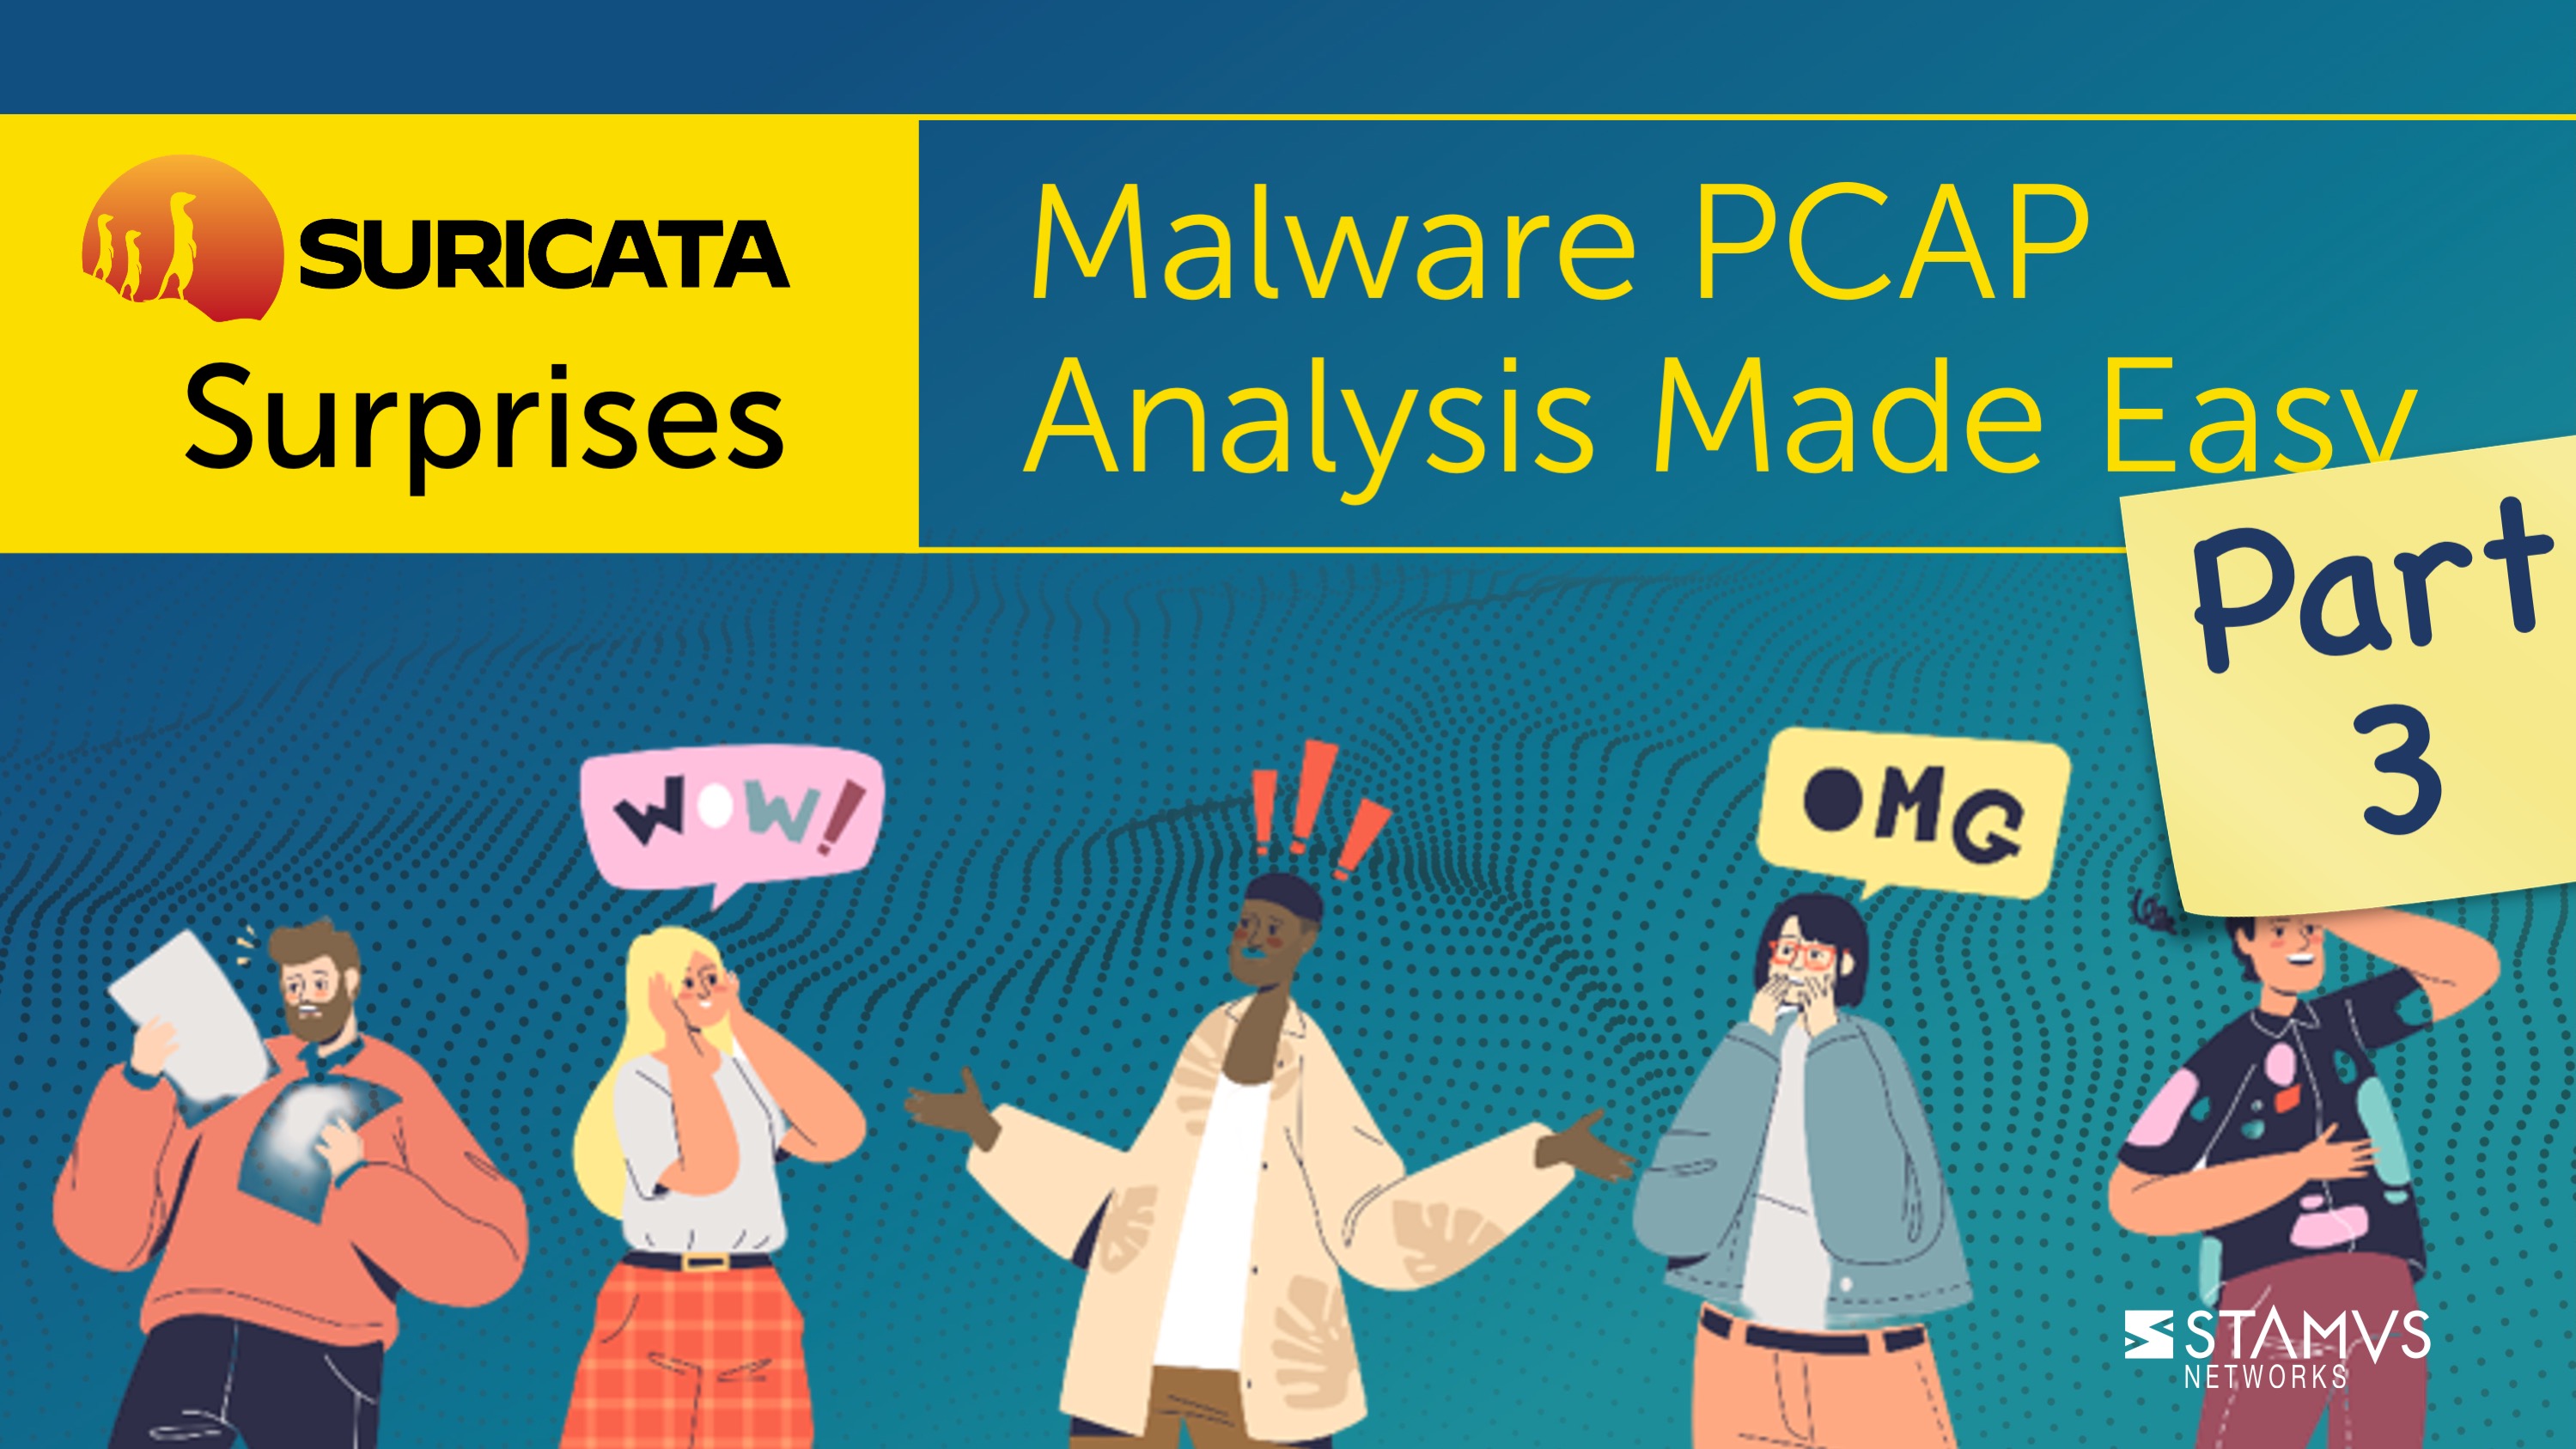 Malware PCAP Analysis Made Easy Part 3 by Peter Manev